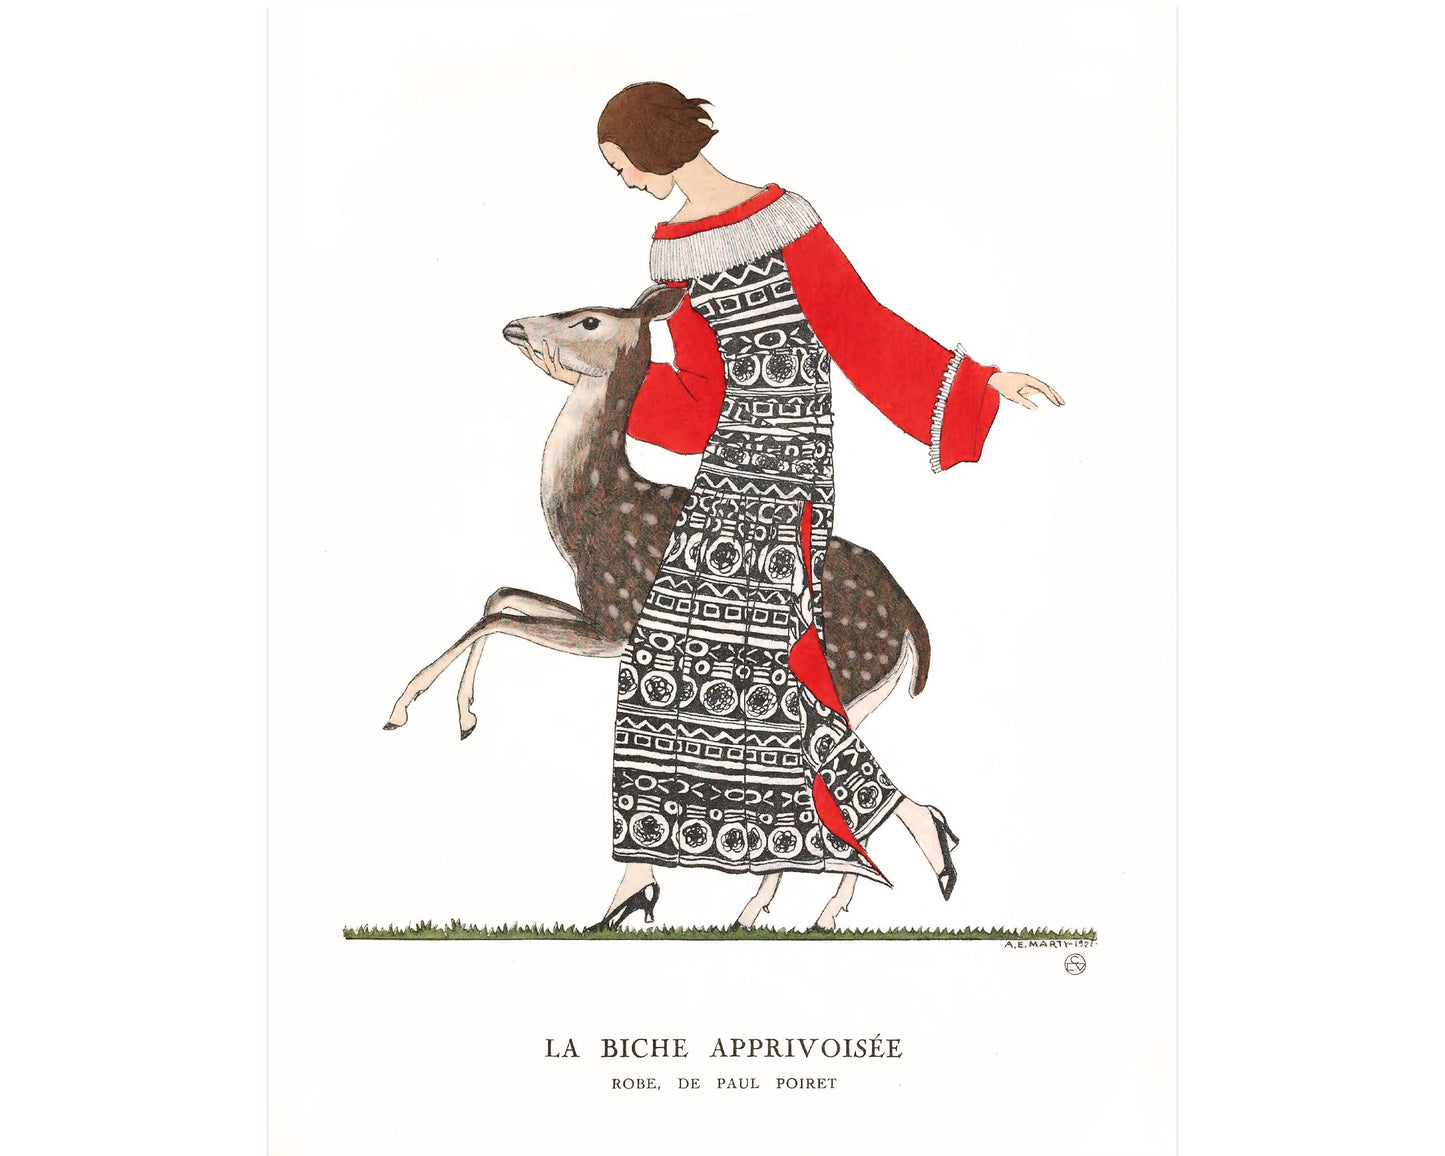 Vintage French Christmas Decor - 1920's Fashion Plate - The Tame Doe